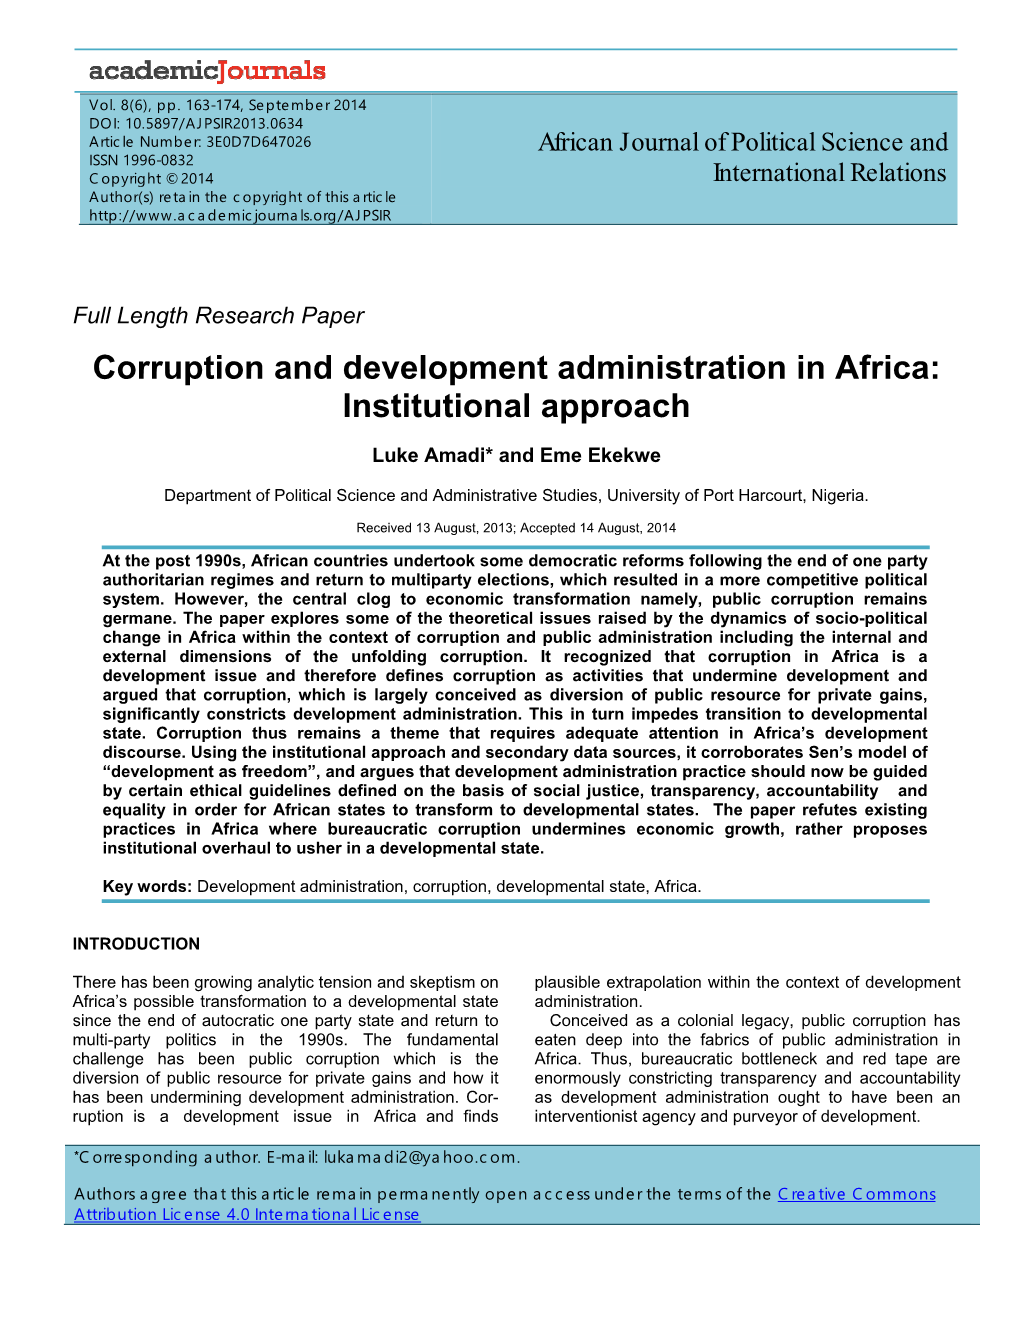 Corruption and Development Administration in Africa: Institutional Approach